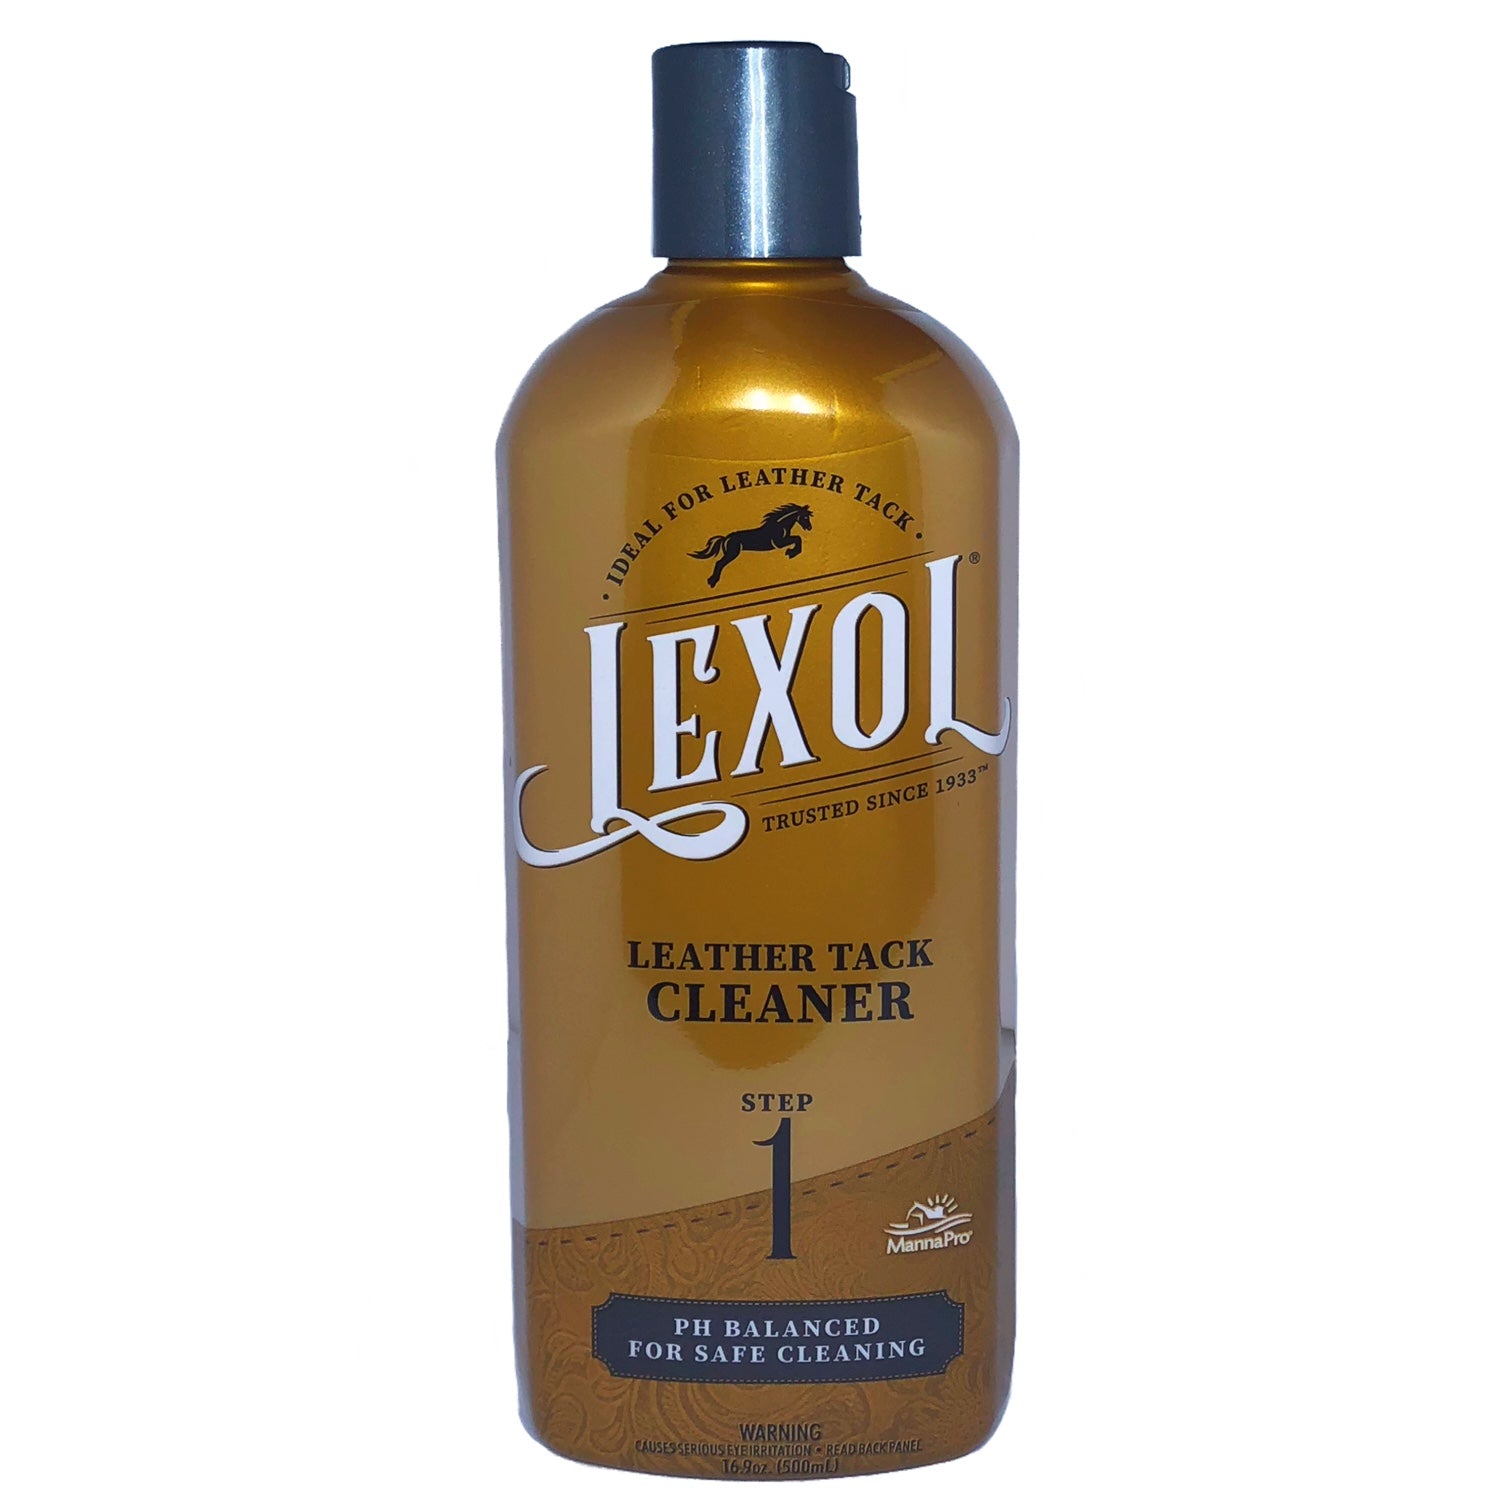 Lexol Leather Cleaner and Conditioner Bundle - Shamma Sandals